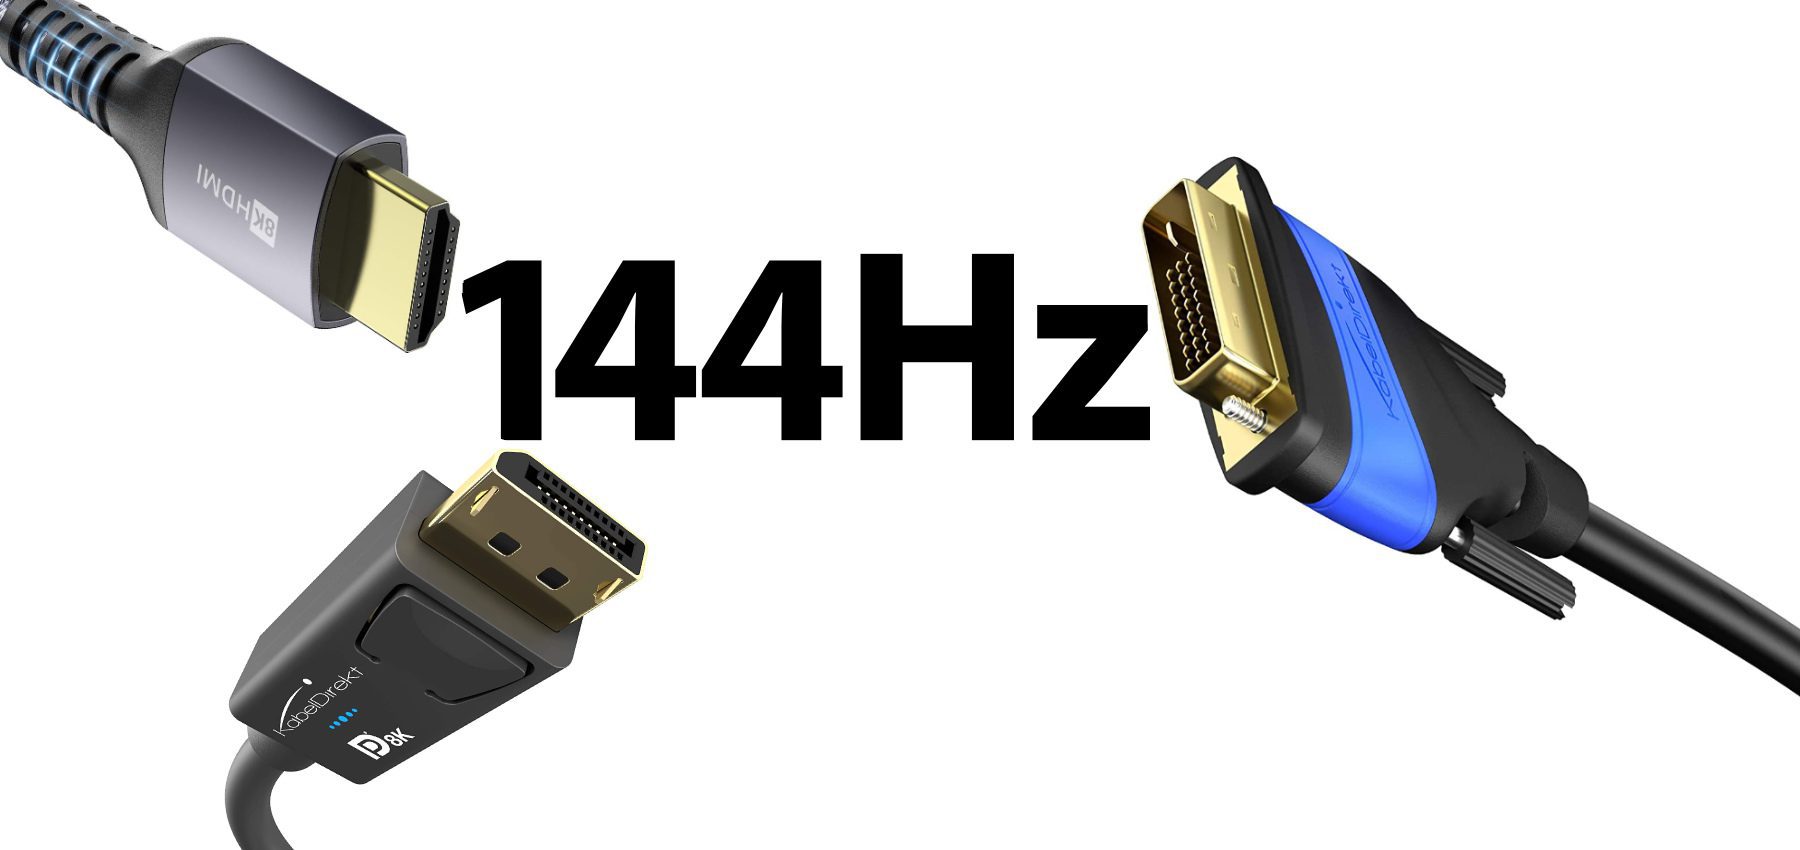 patinar Simposio Puntualidad Which cable do you need for a 144Hz monitor? “Sir Apfelot